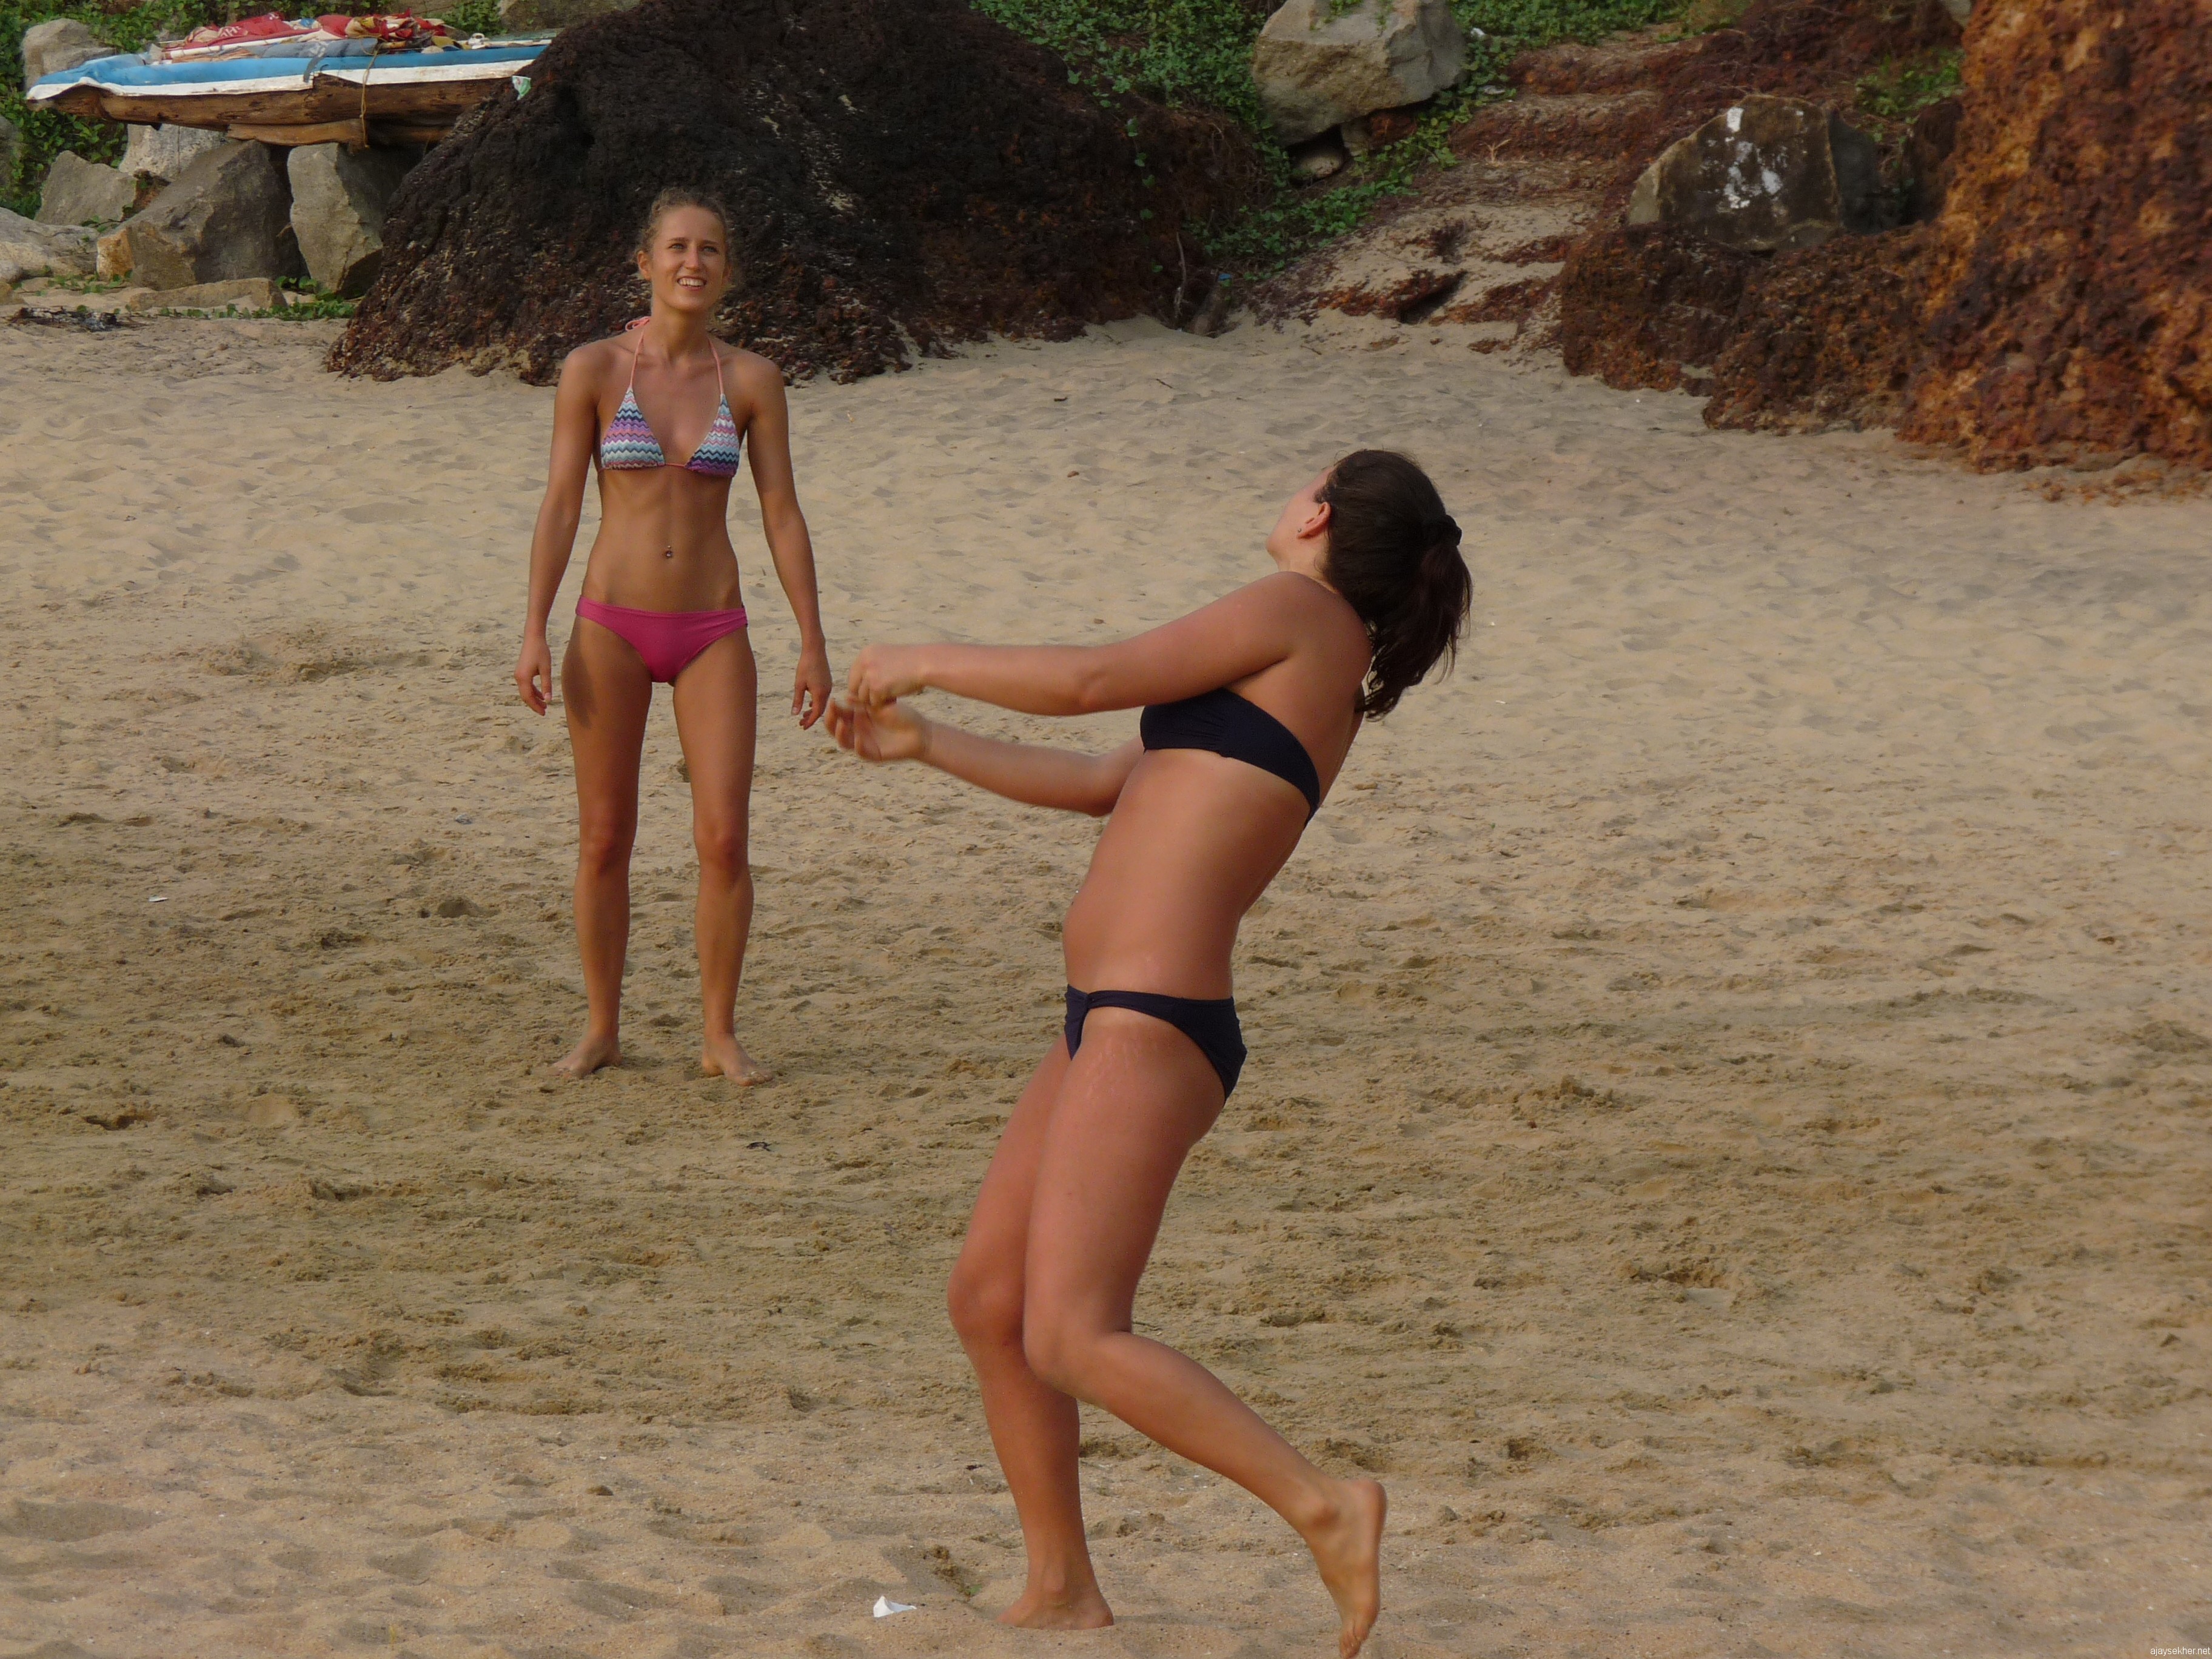 Playing Christmas: Women in action in beach volleyball at Papanasam, Varkala on 2012 Christmas day.